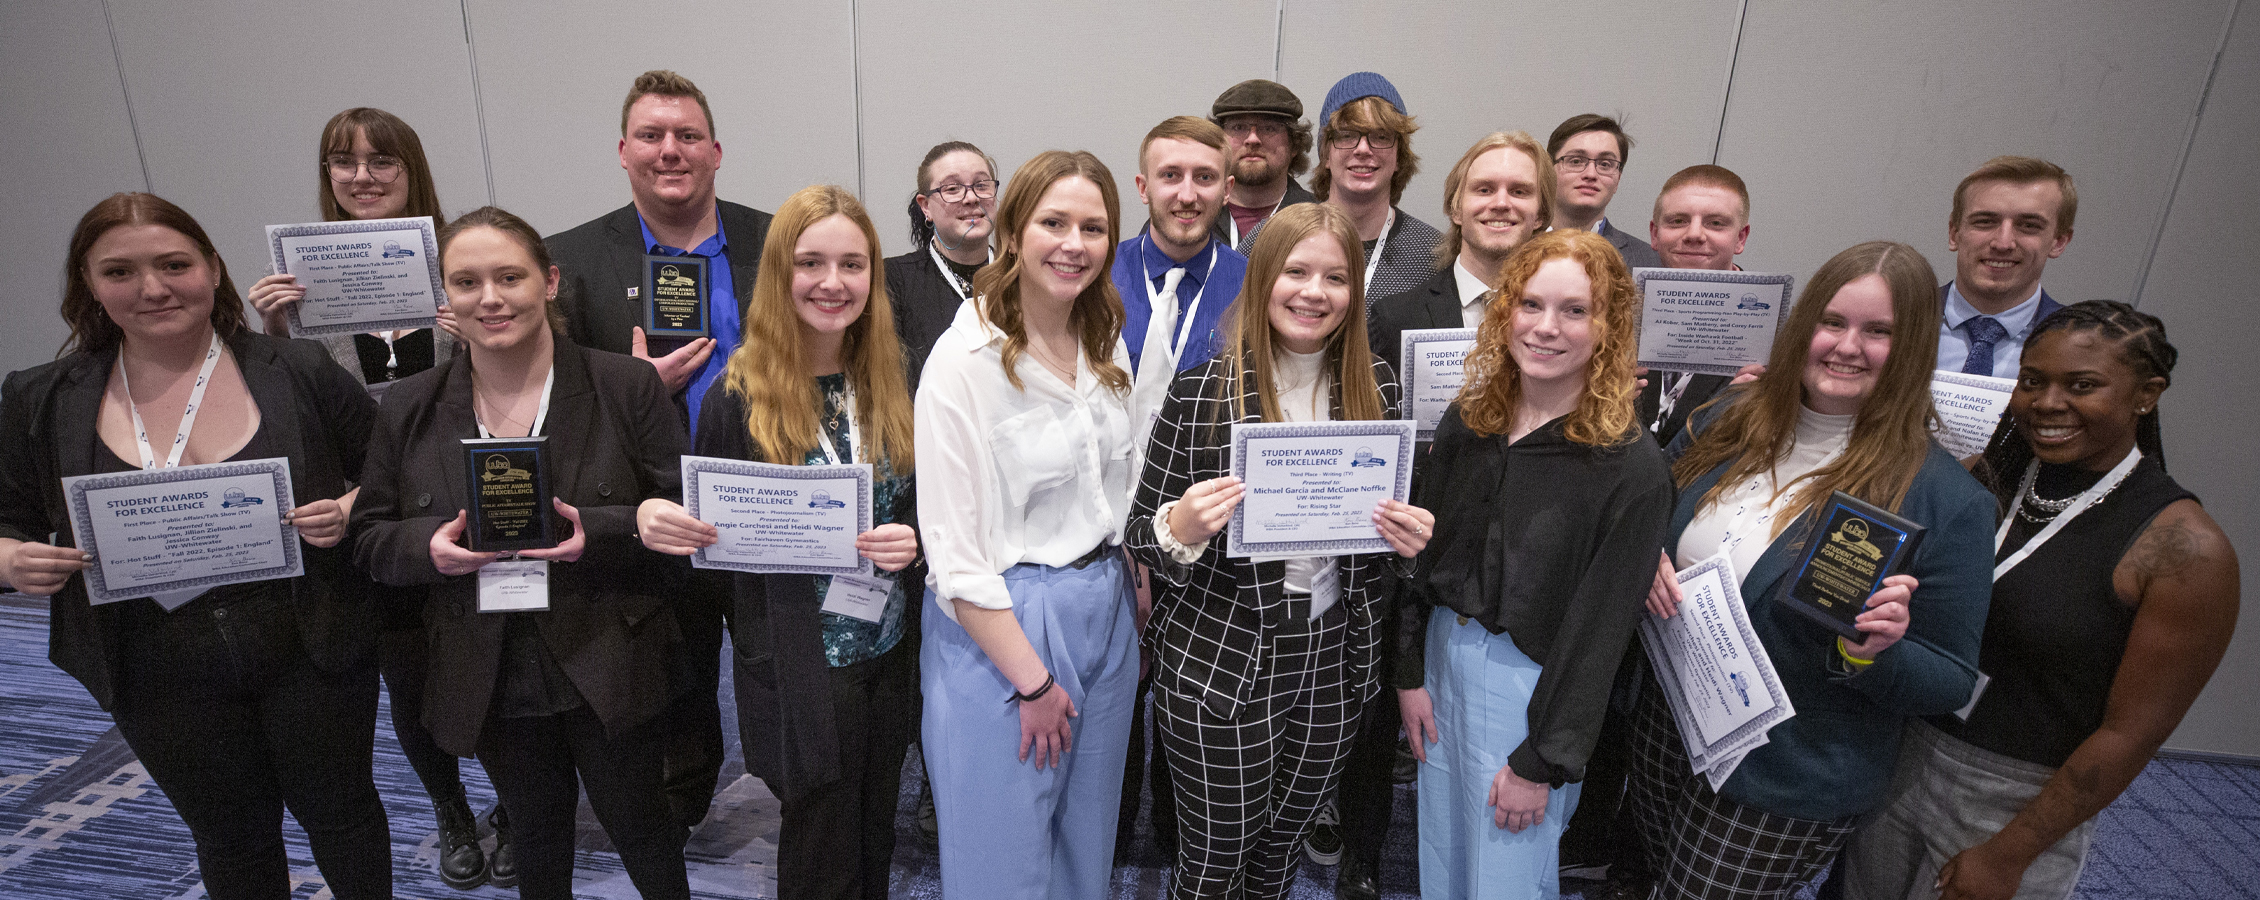 Group photo of students at the Wisconsin Broadcasters Association seminar and awards program.